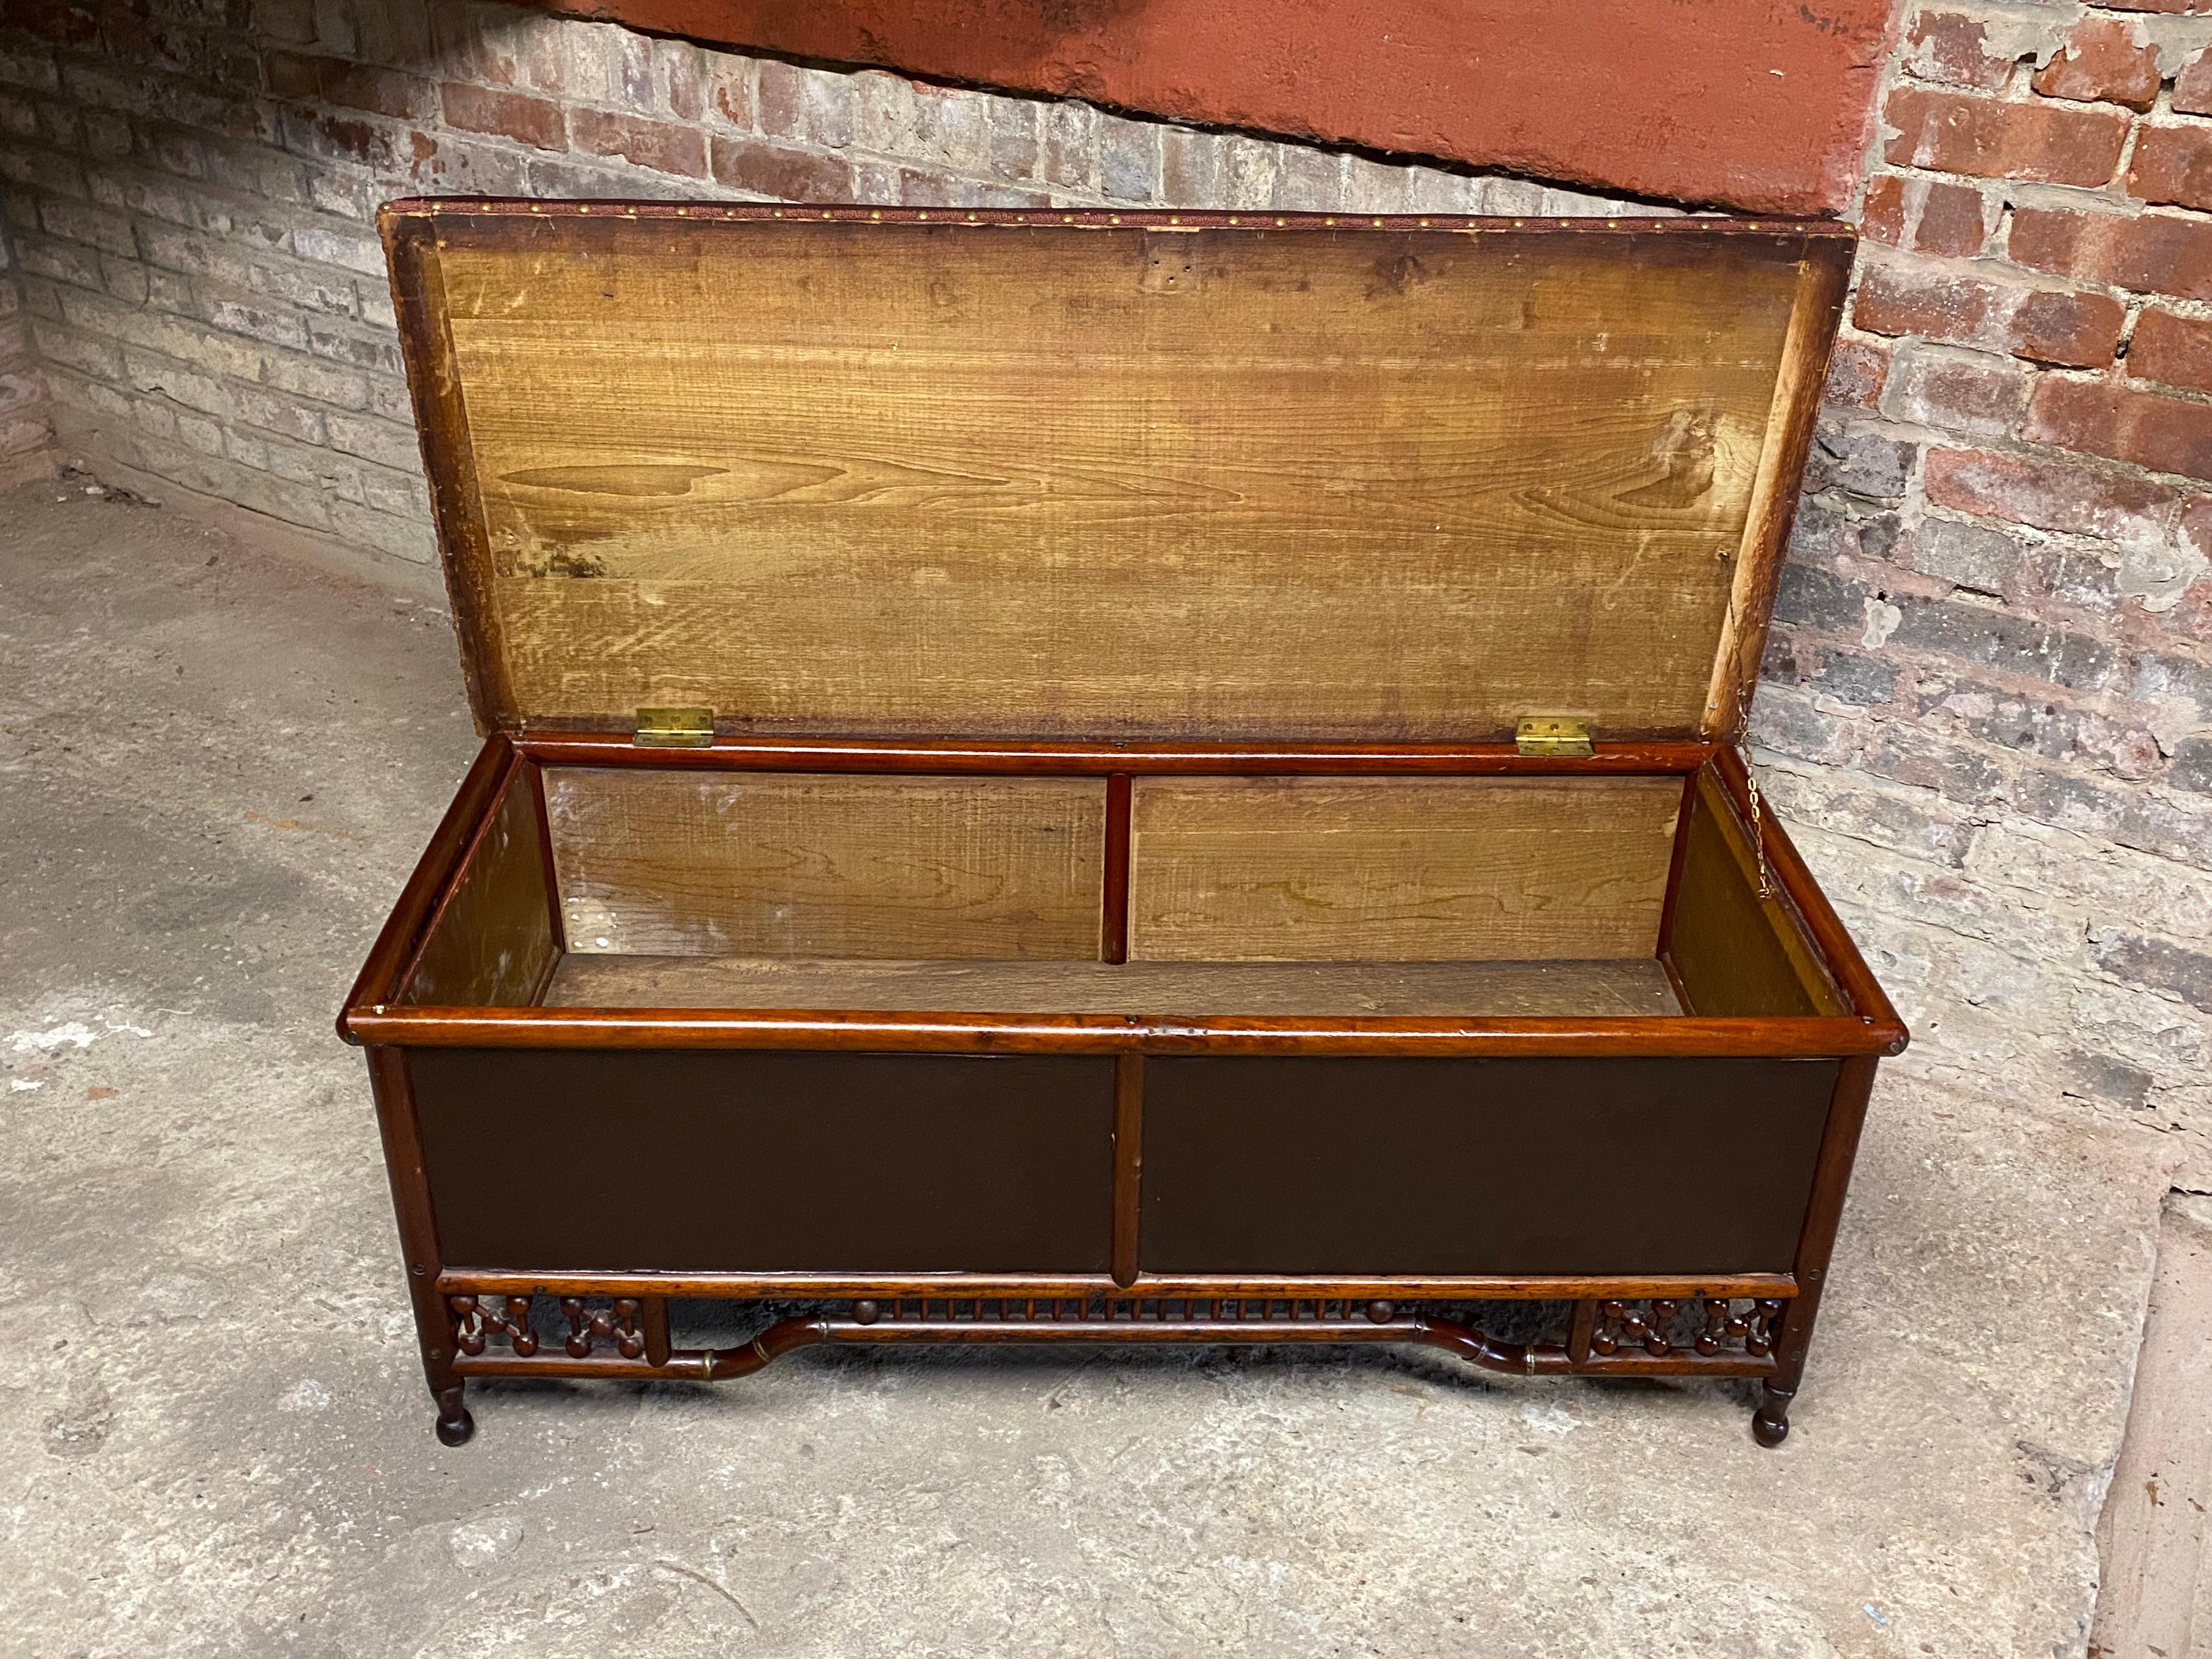 19th Century Victorian Stick and Ball Blanket Chest